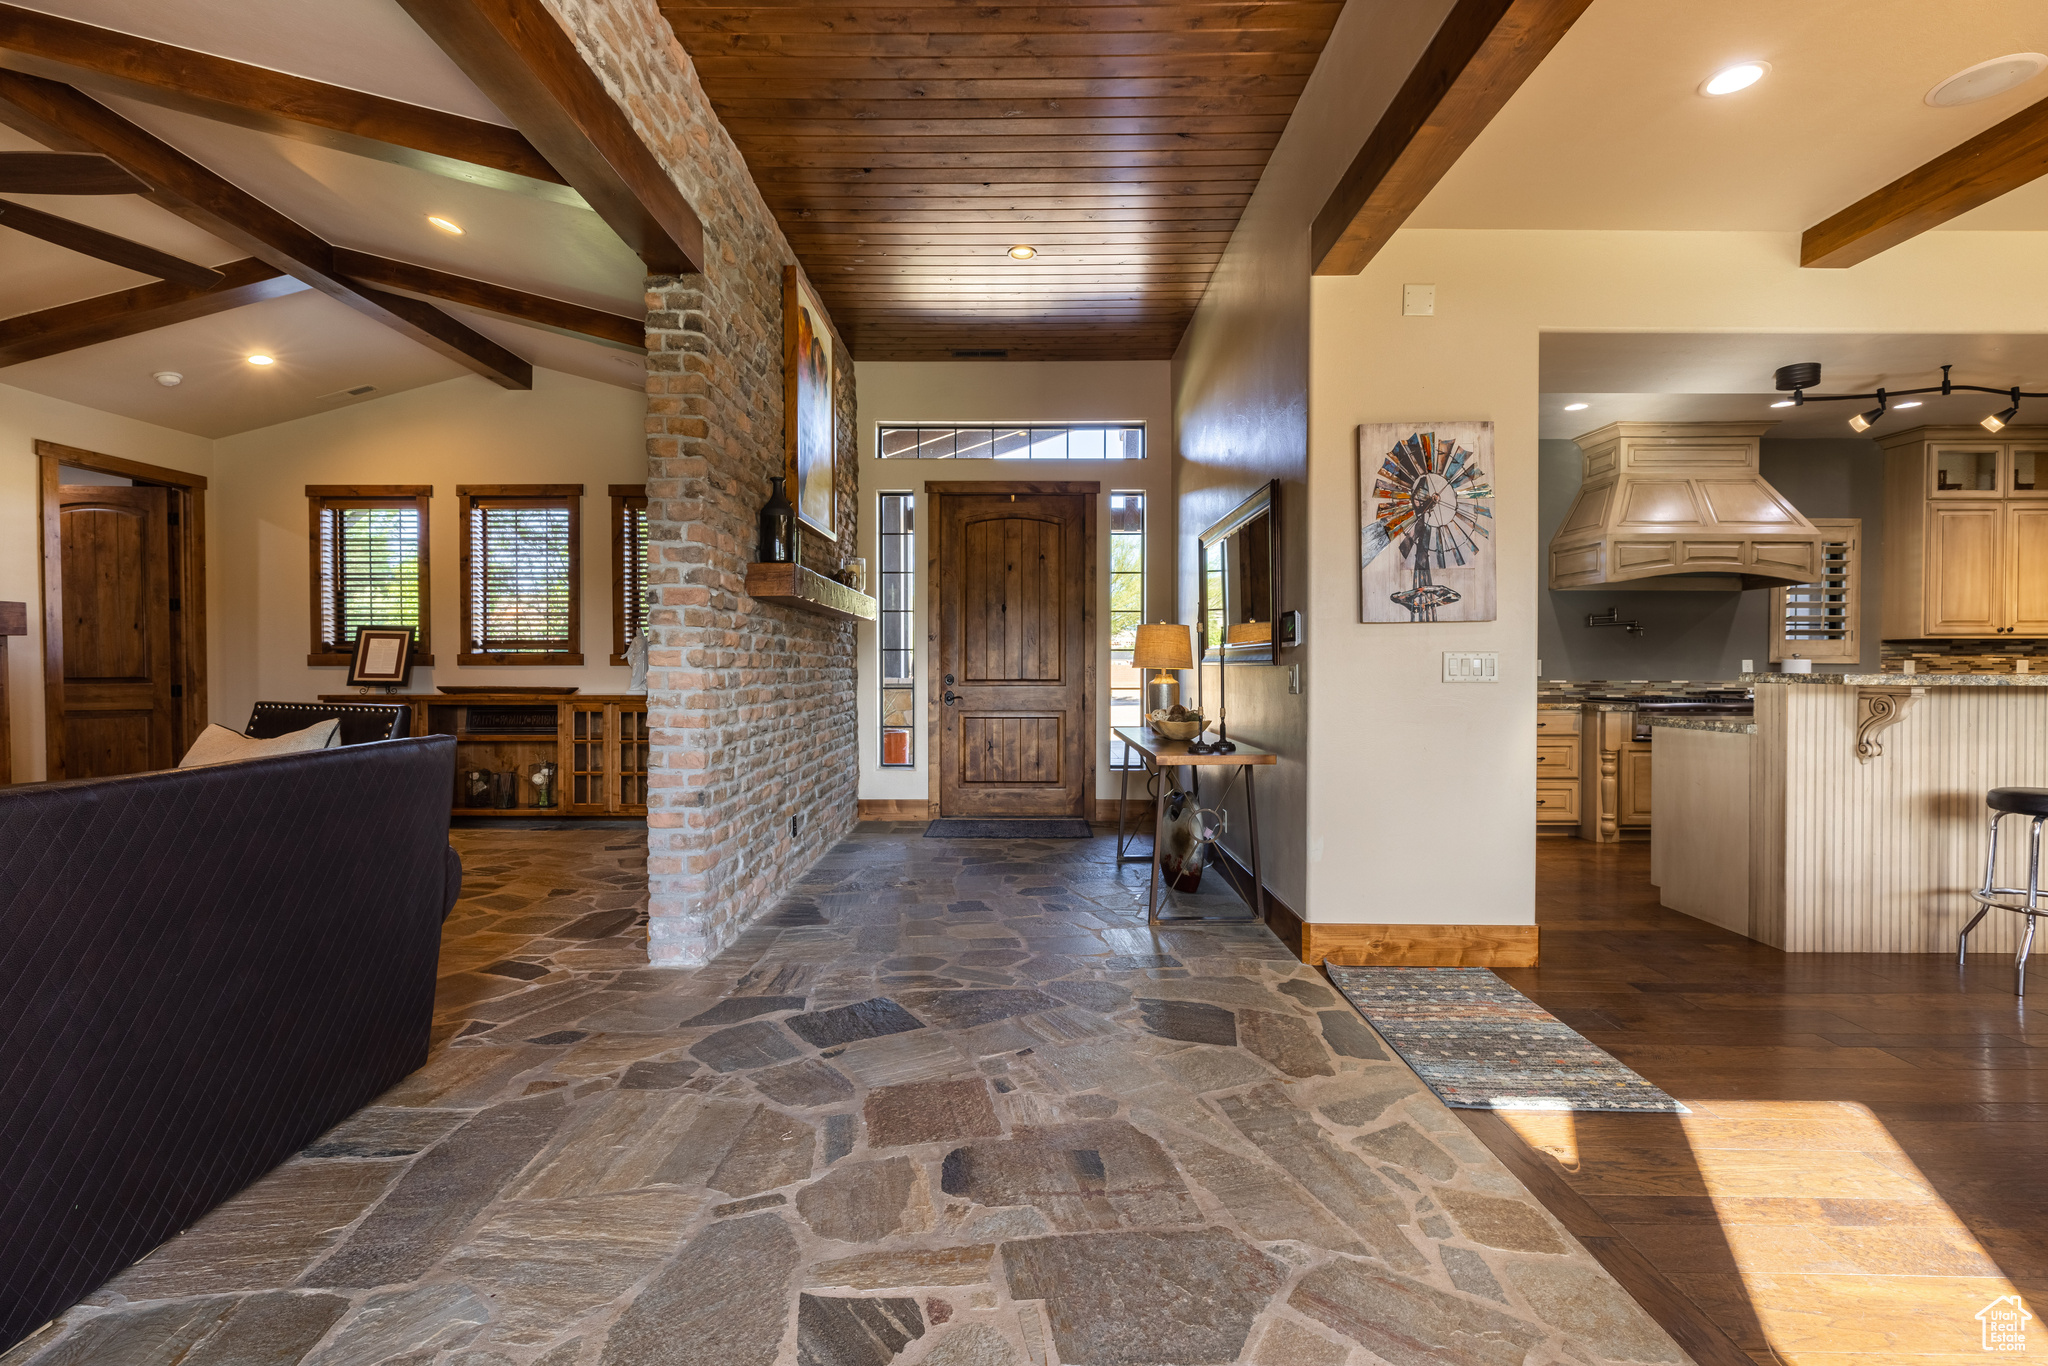 Entrance foyer with a wealth of natural light, Nevada slate flooring, and vaulted ceiling with beams in adjacent great room